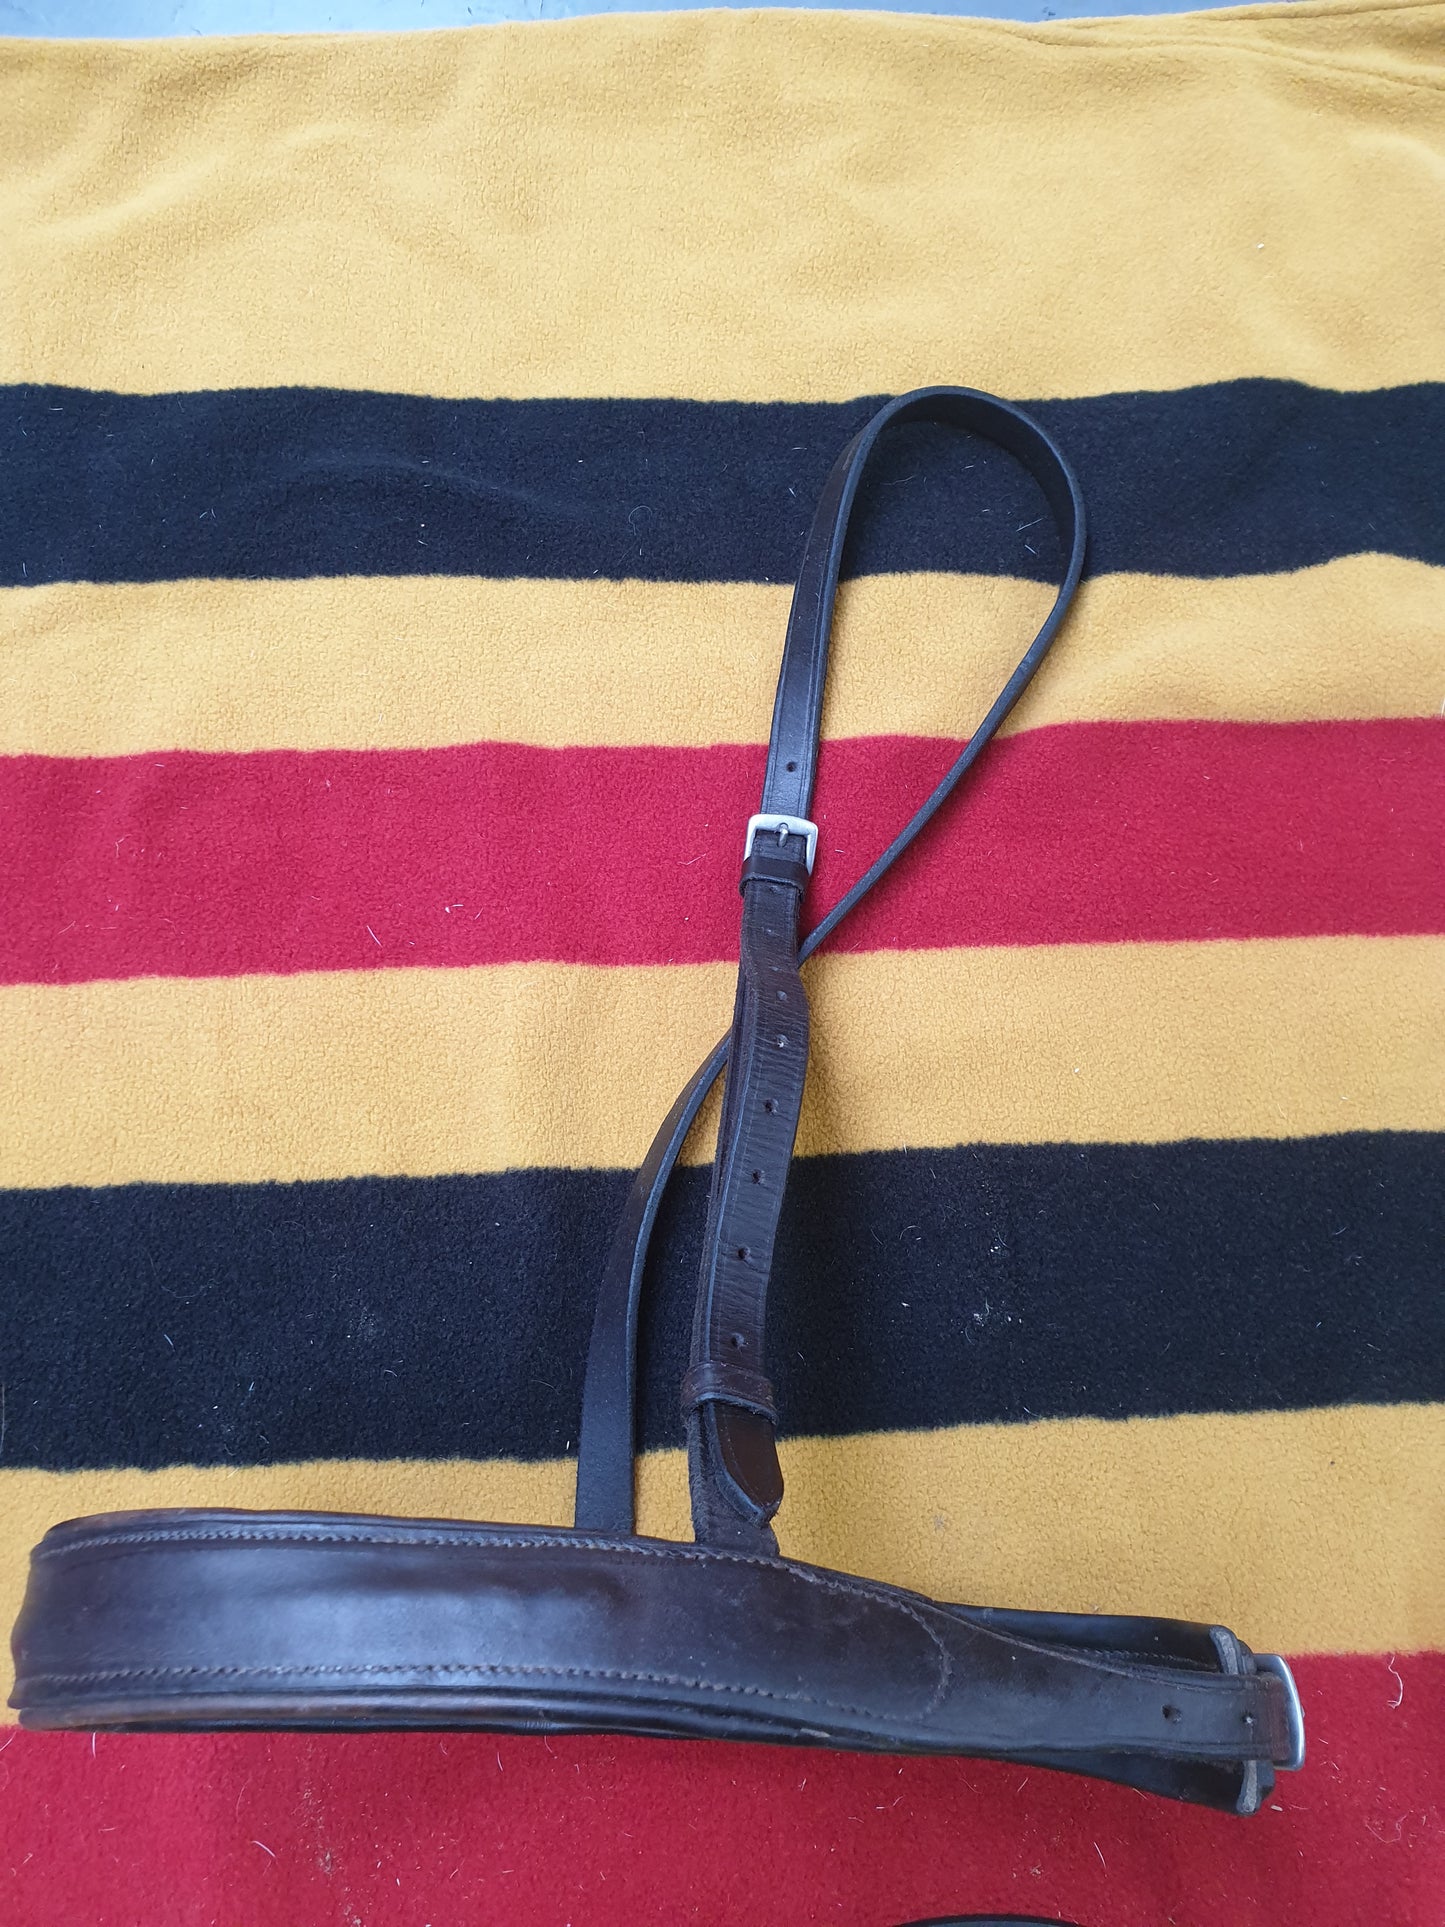 Used full size brown leather nose band FREE POSTAGE☆